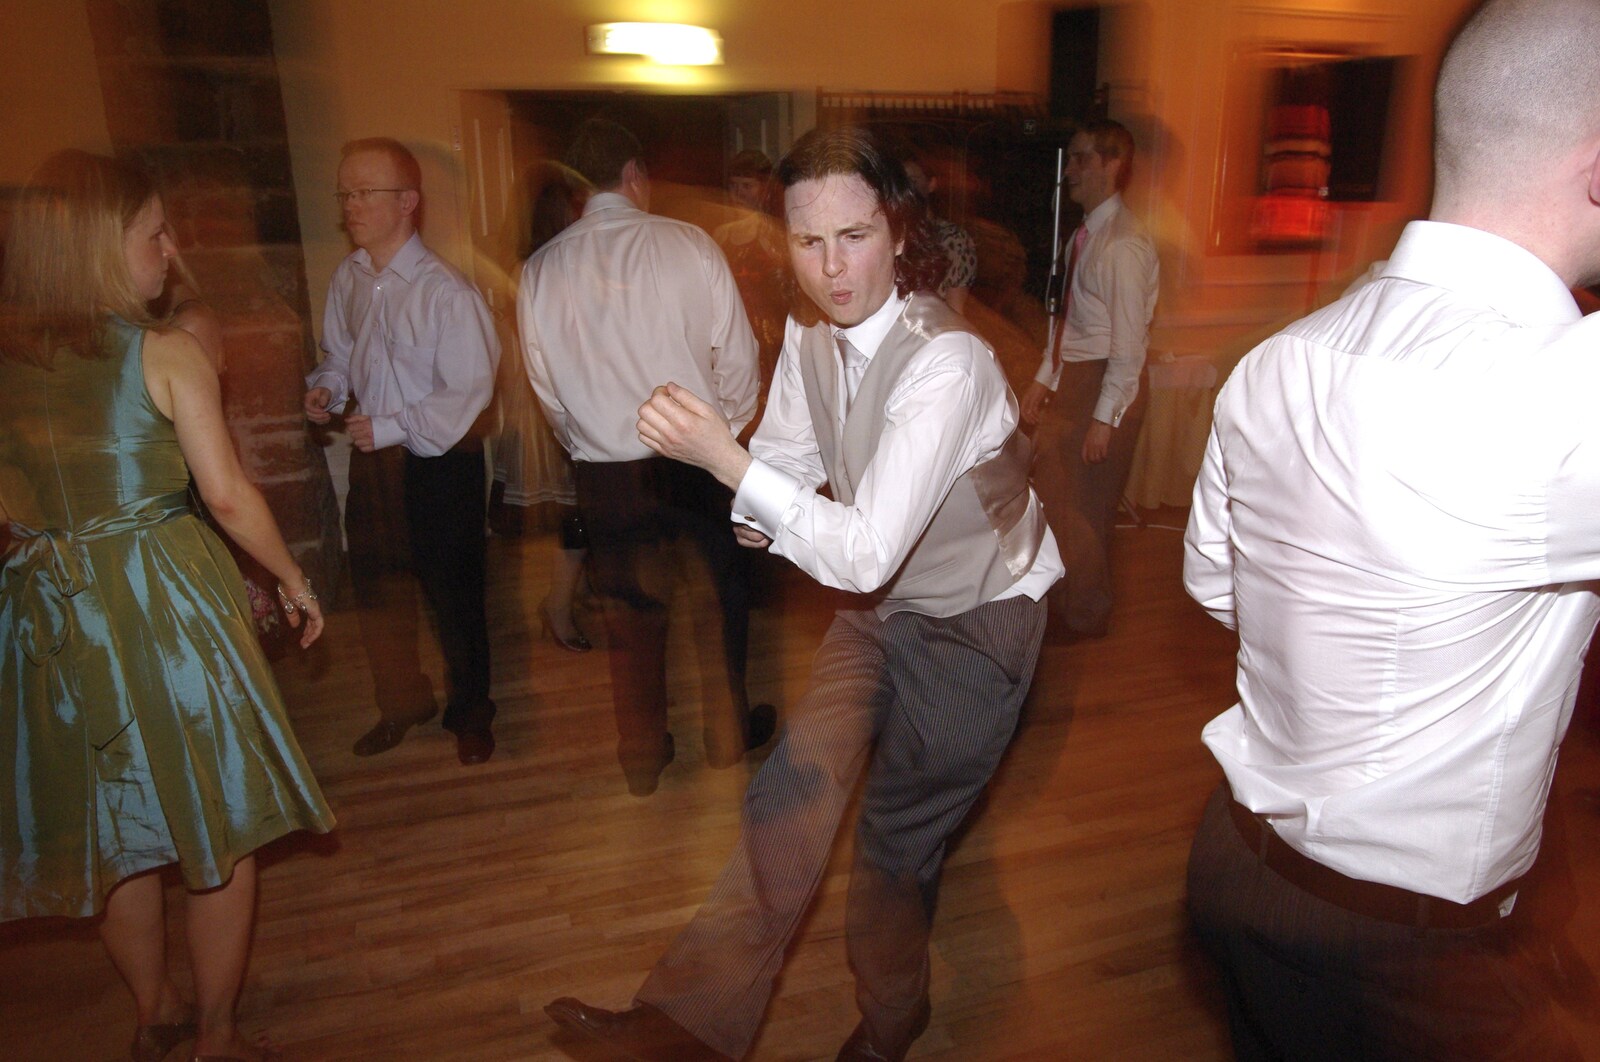 Paul and Jenny's Wedding, Tralee, County Kerry, Ireland - 3rd May 2008: Barry gets kicked in the nuts (not really)